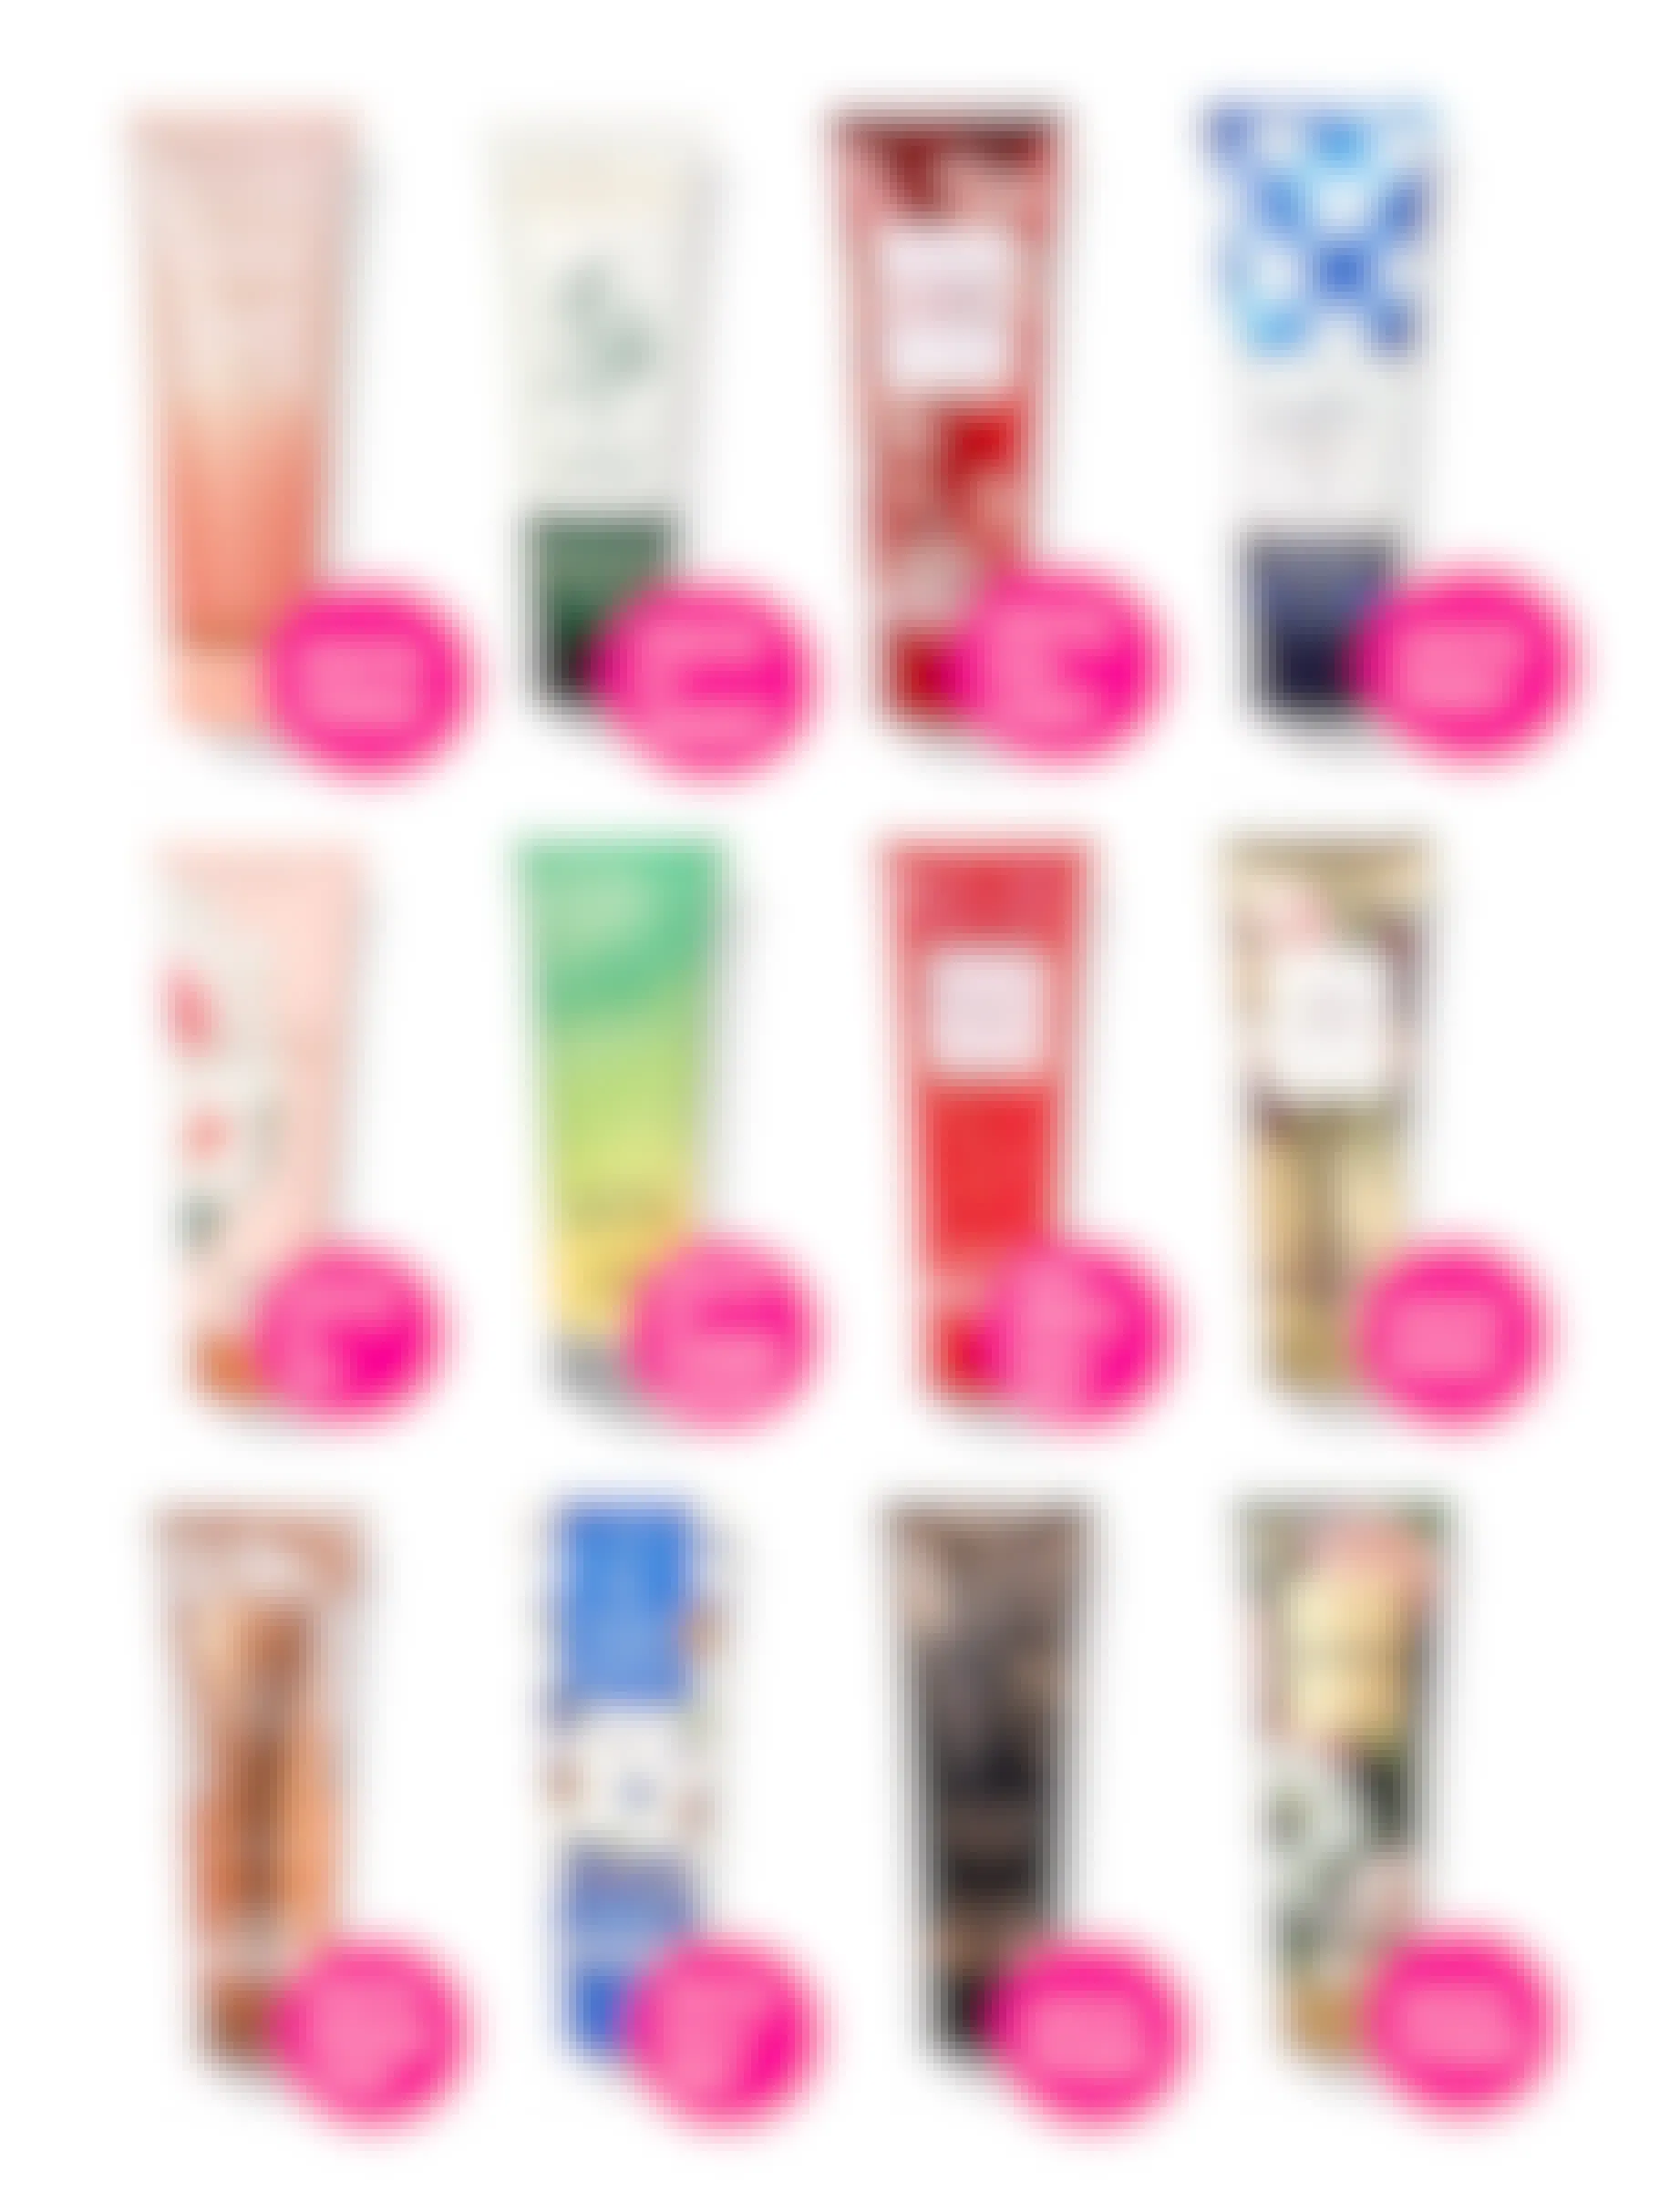 A graphic of many different Bath & Body Works lotion fragrances and what your favorite says about your personality.